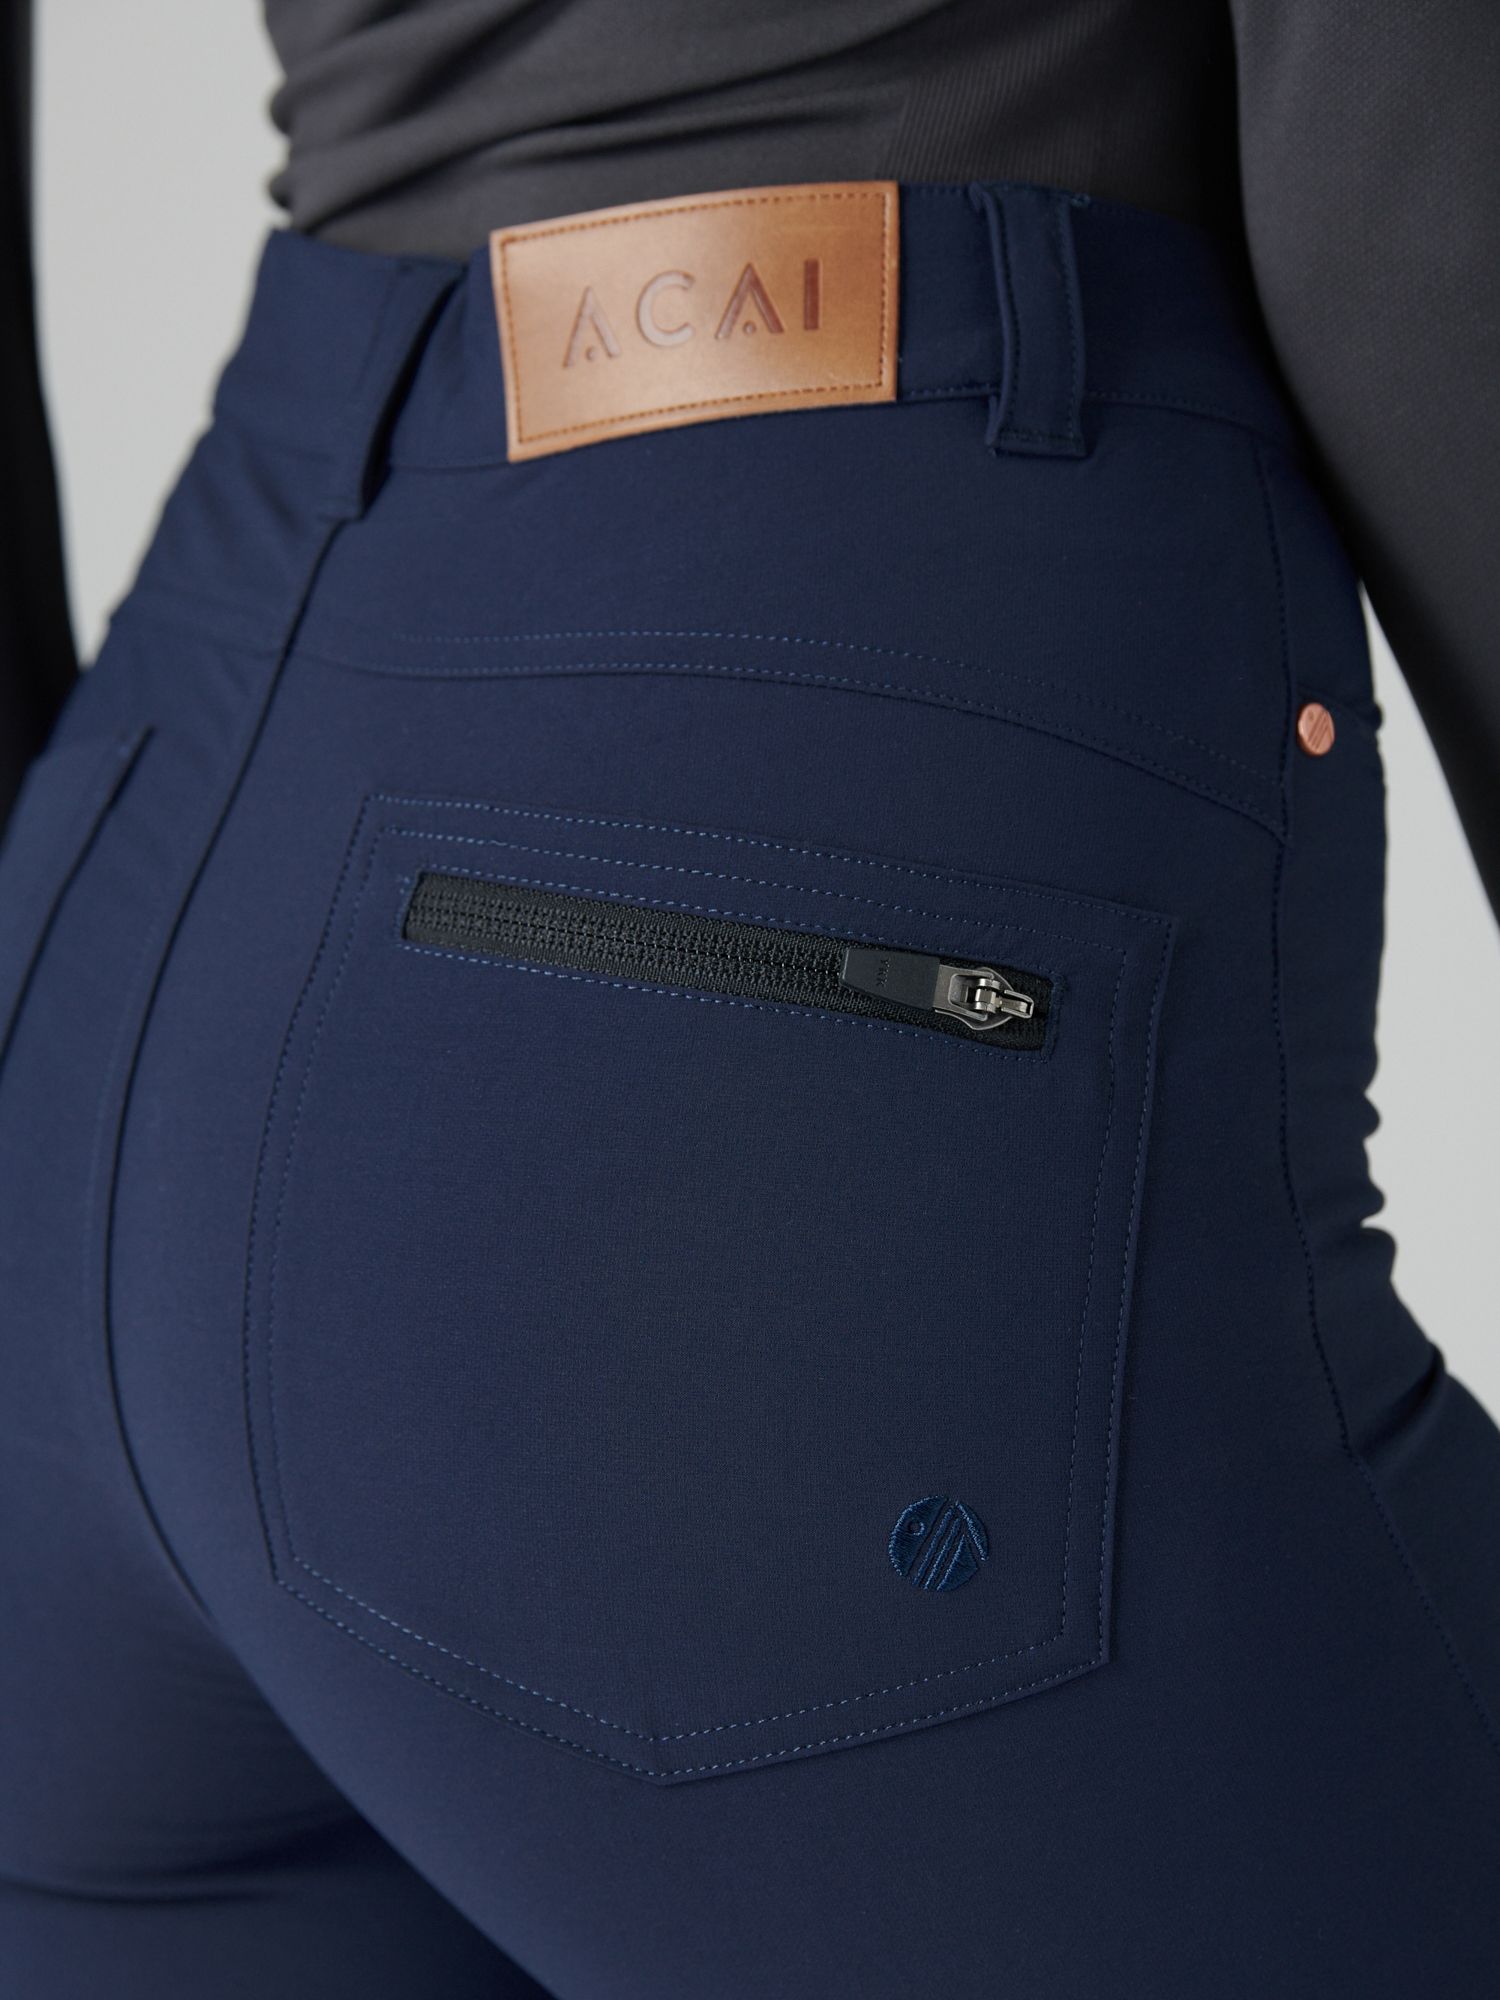 Buy ACAI MAX Stretch Skinny Outdoor Trousers Online at johnlewis.com